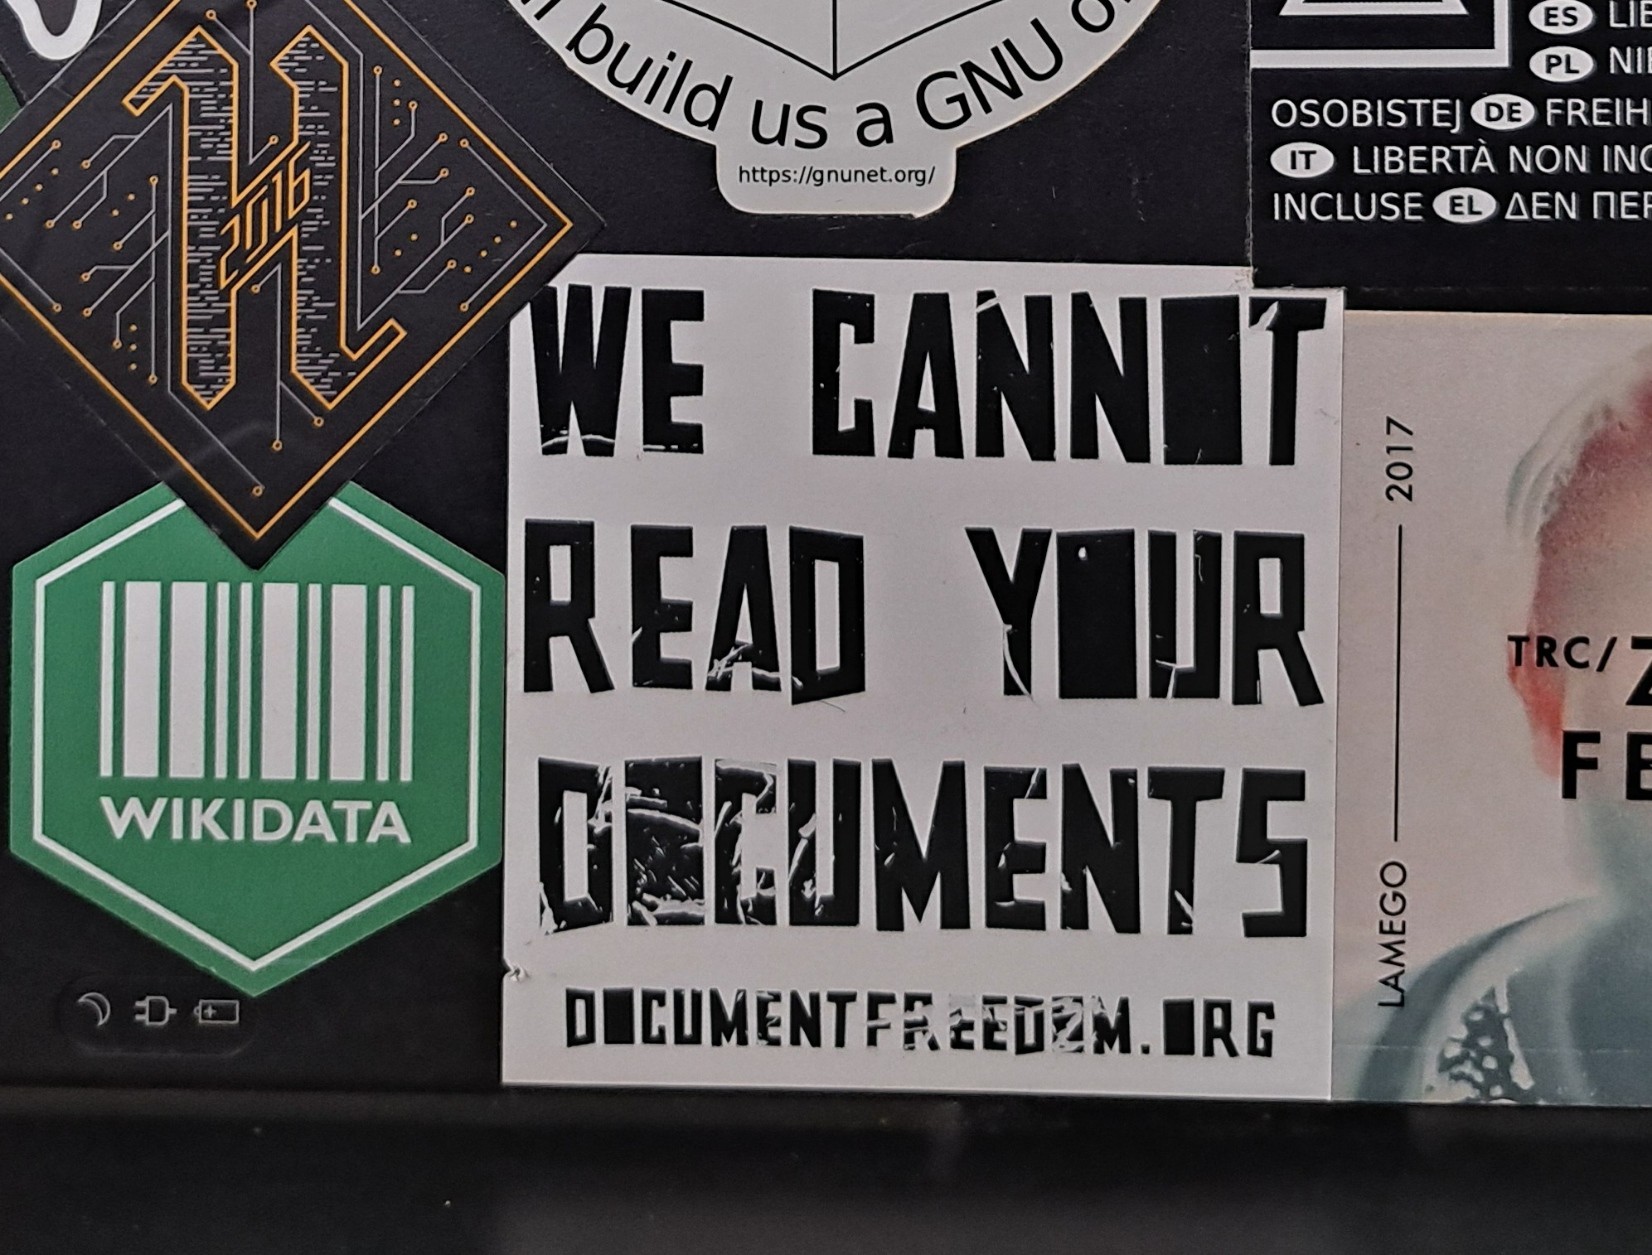 A few stickers on a laptop, the central one saying "We Cannot Read Your Documents", and pointing to documentfreedom.org